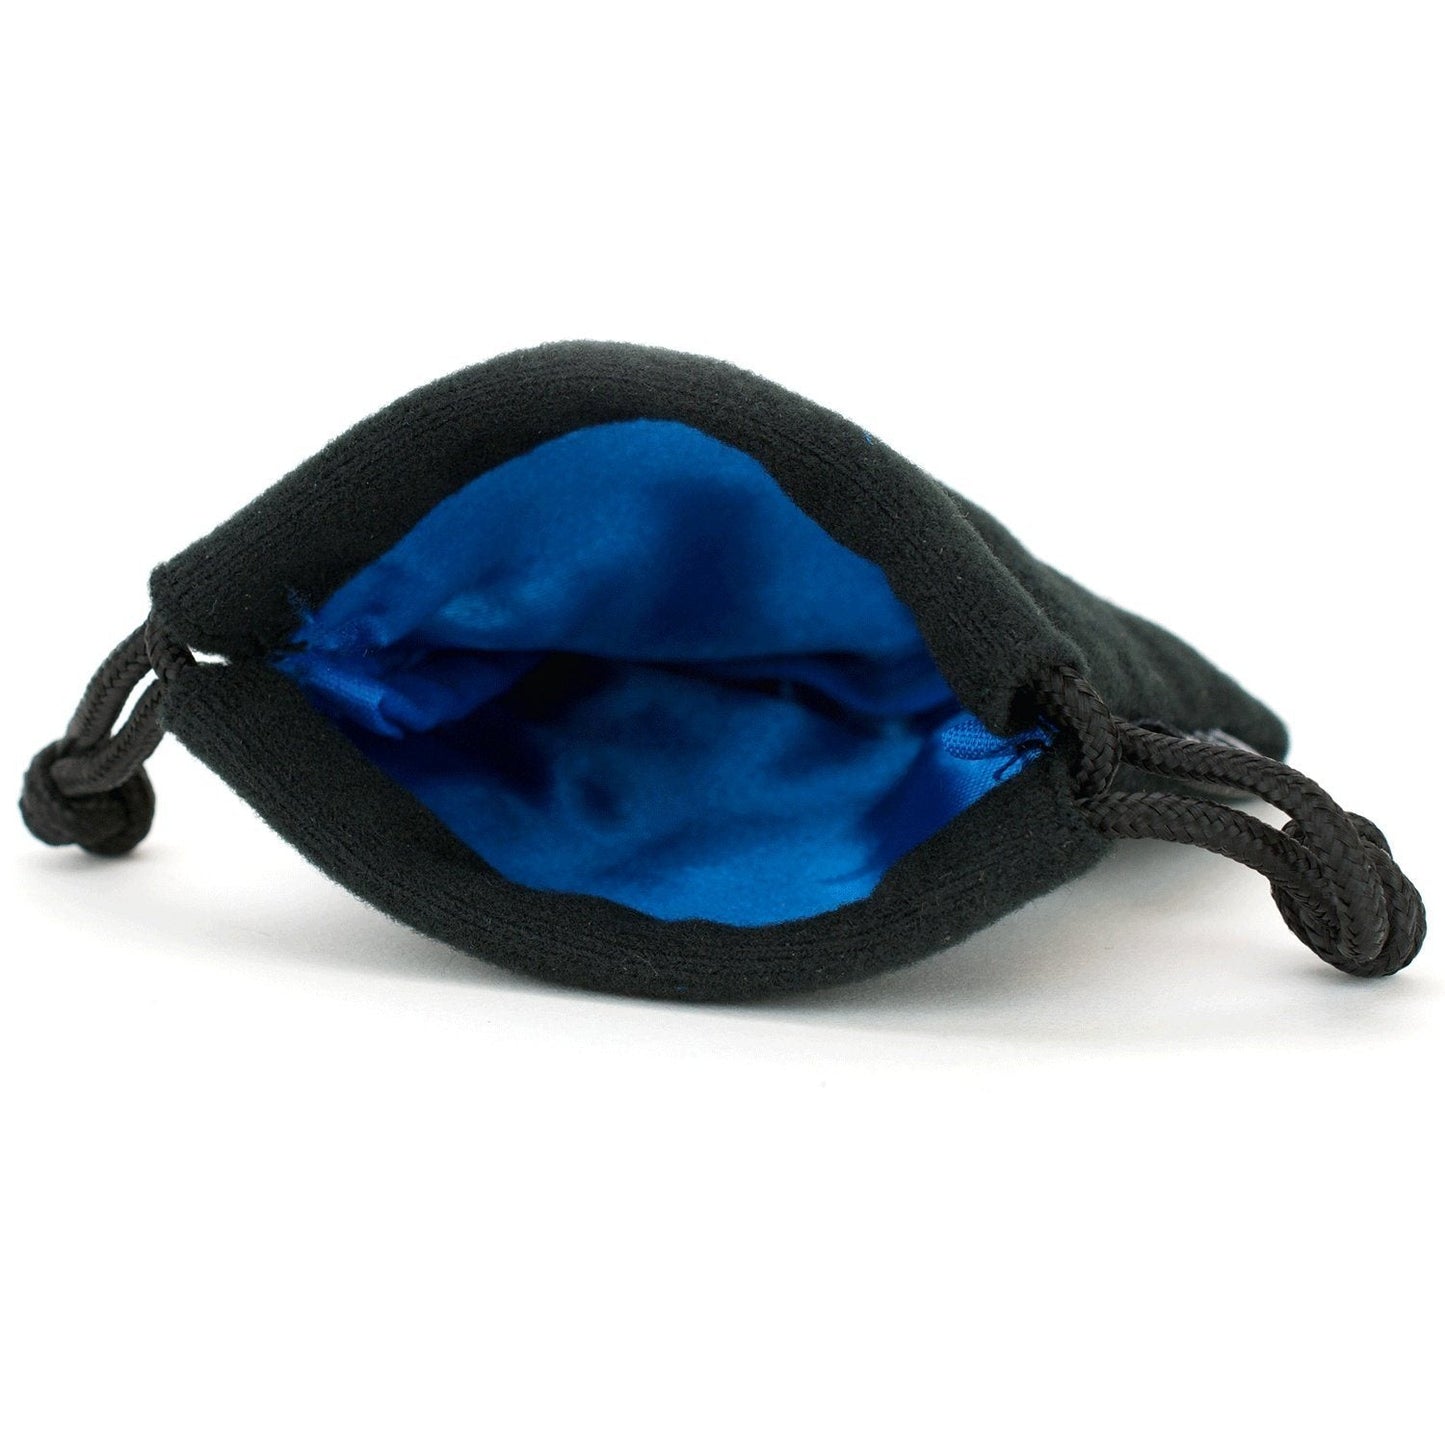 Small Dice Bag 3.75x4 - Black Velvet Exterior, Satin Non-Rip Liner - Multiple Colors Available